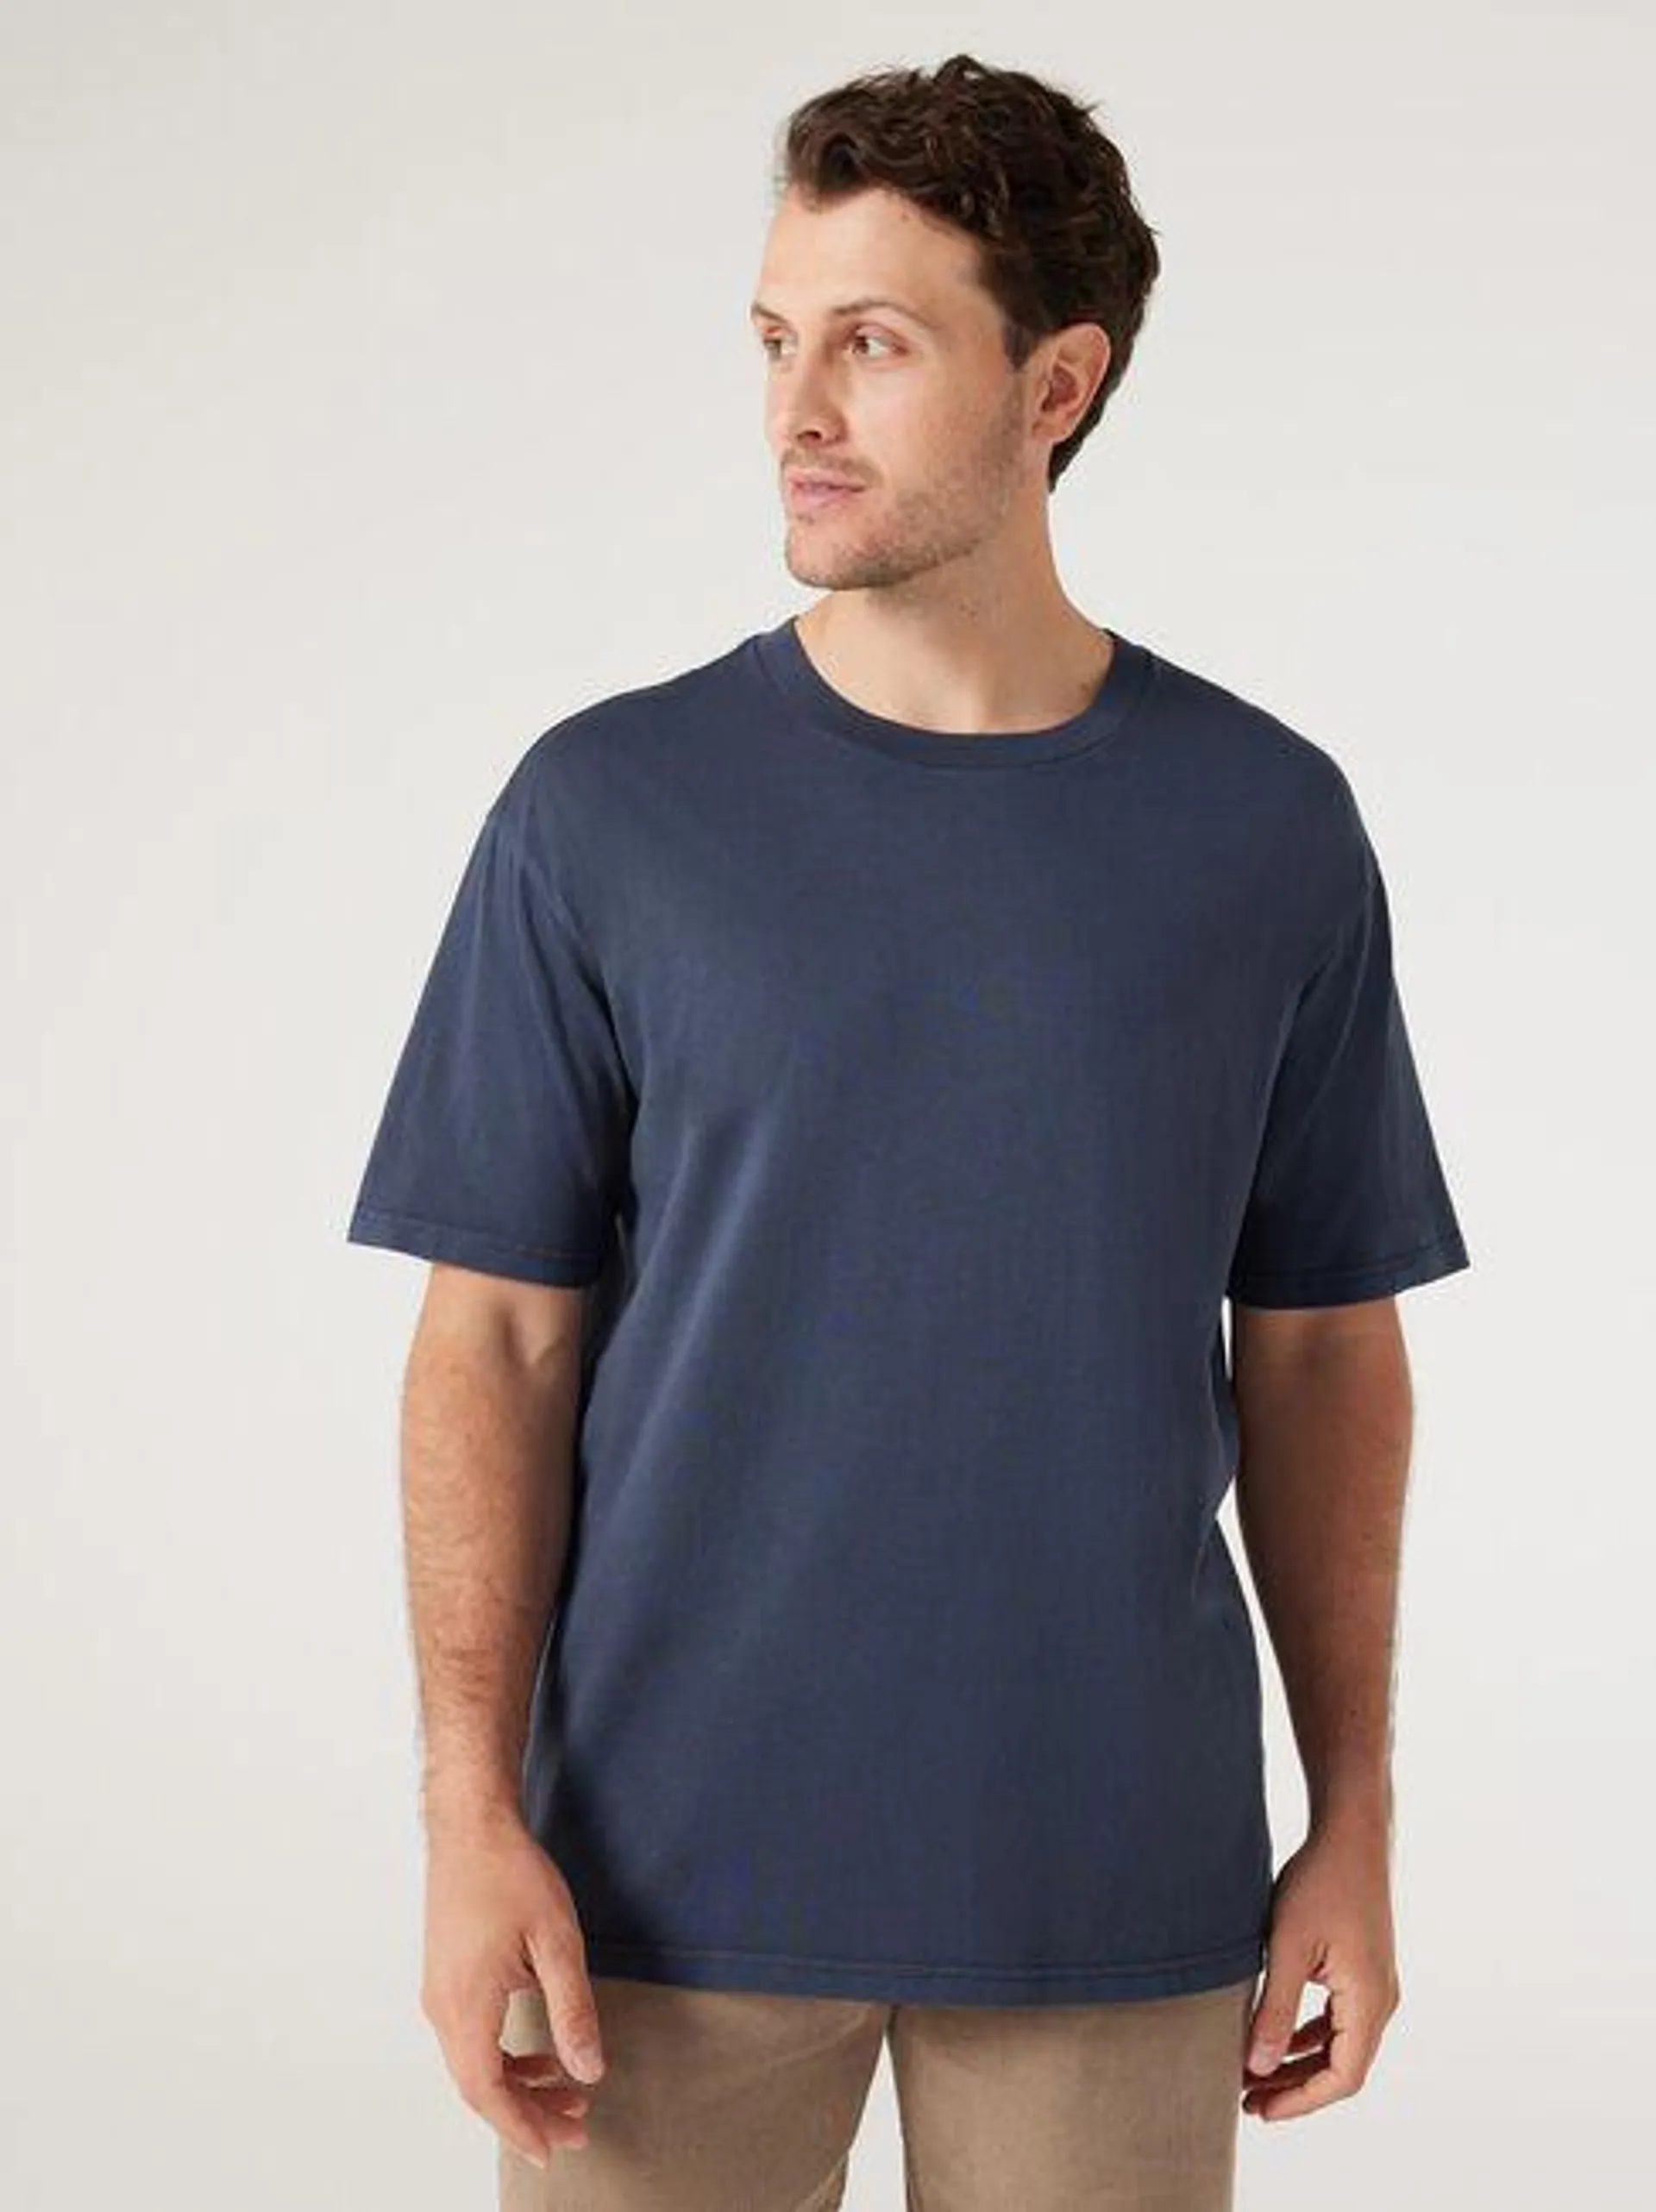 SS Ace Relaxed Fit Basic Crew Tee